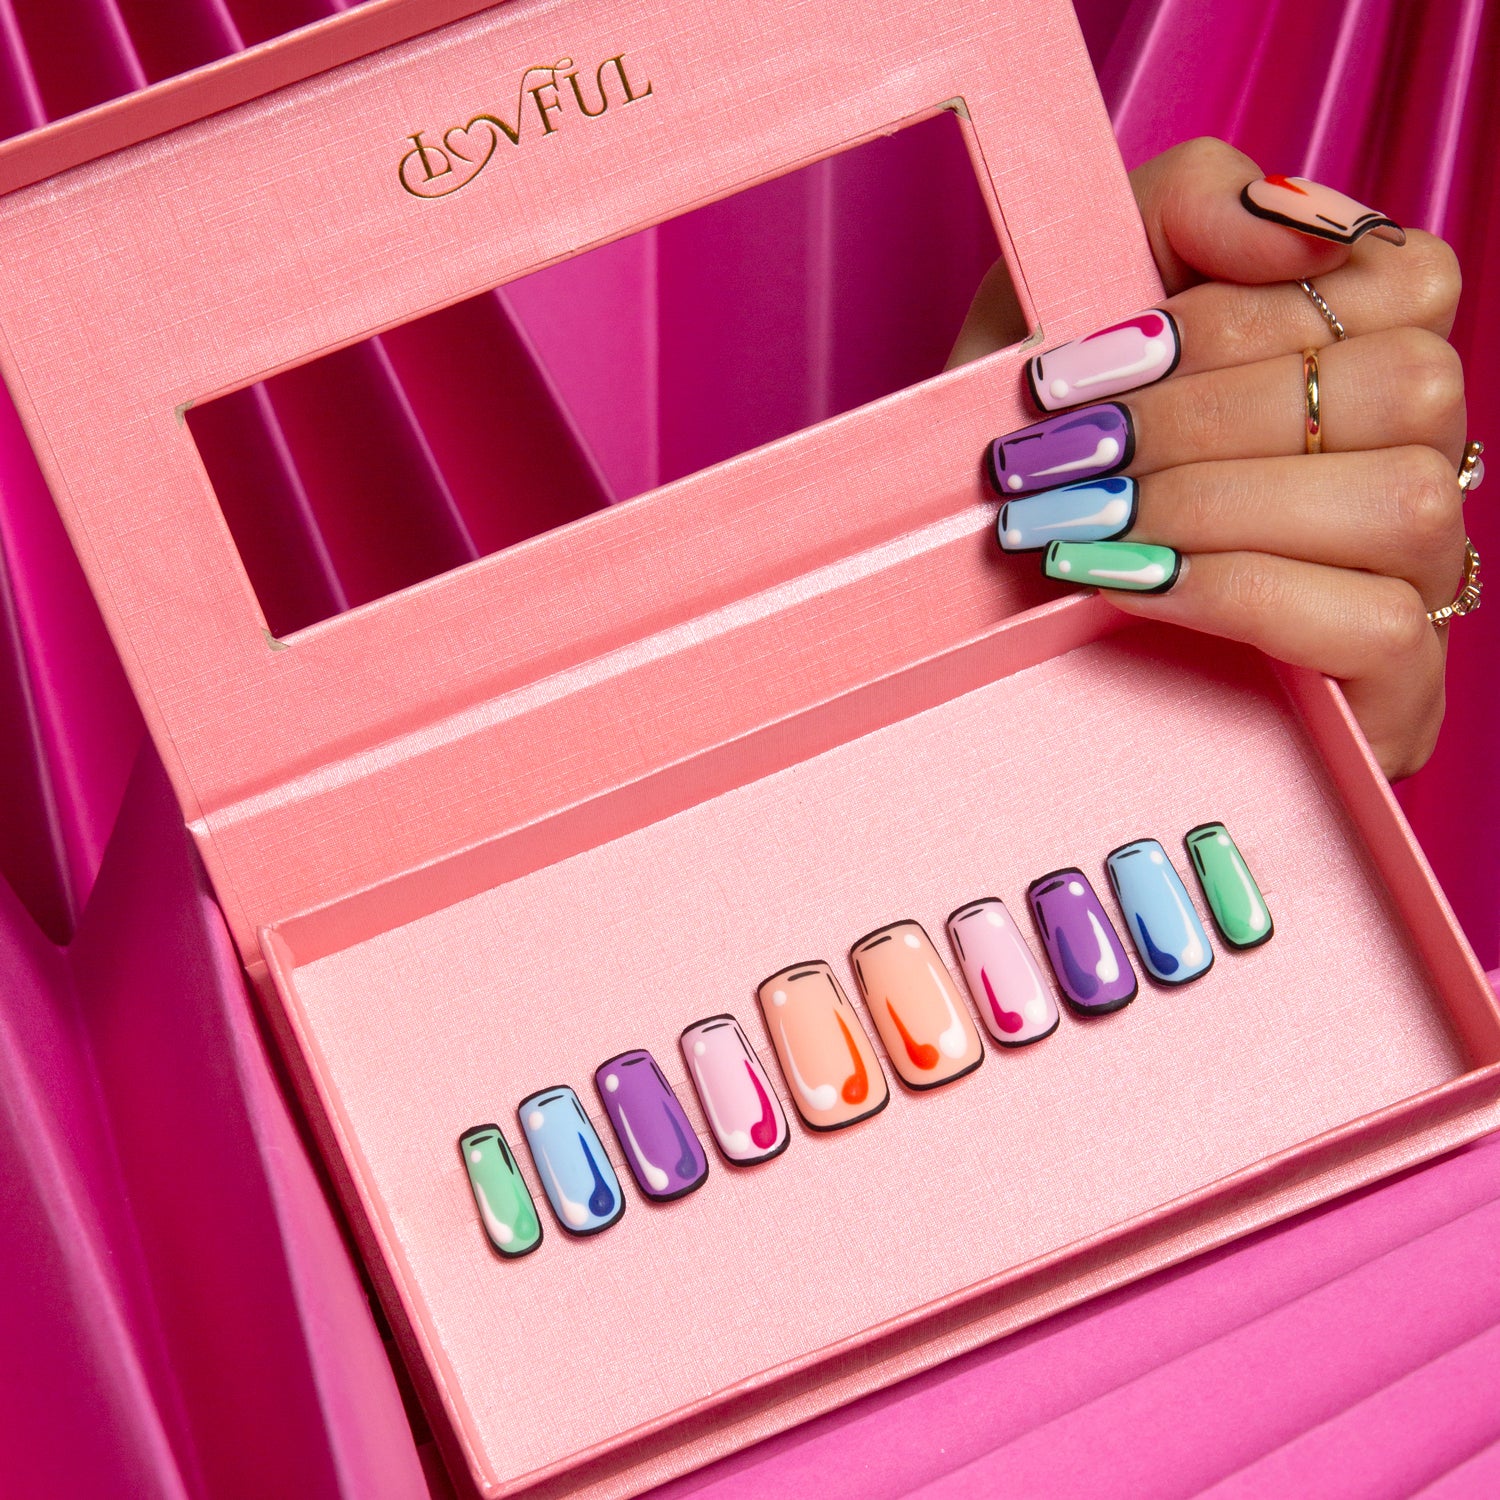 Lovful 'Colorful Pop - Square' press-on nail set featuring vibrant pop art designs in a pink display box, with a hand showing off the colorful nail designs.